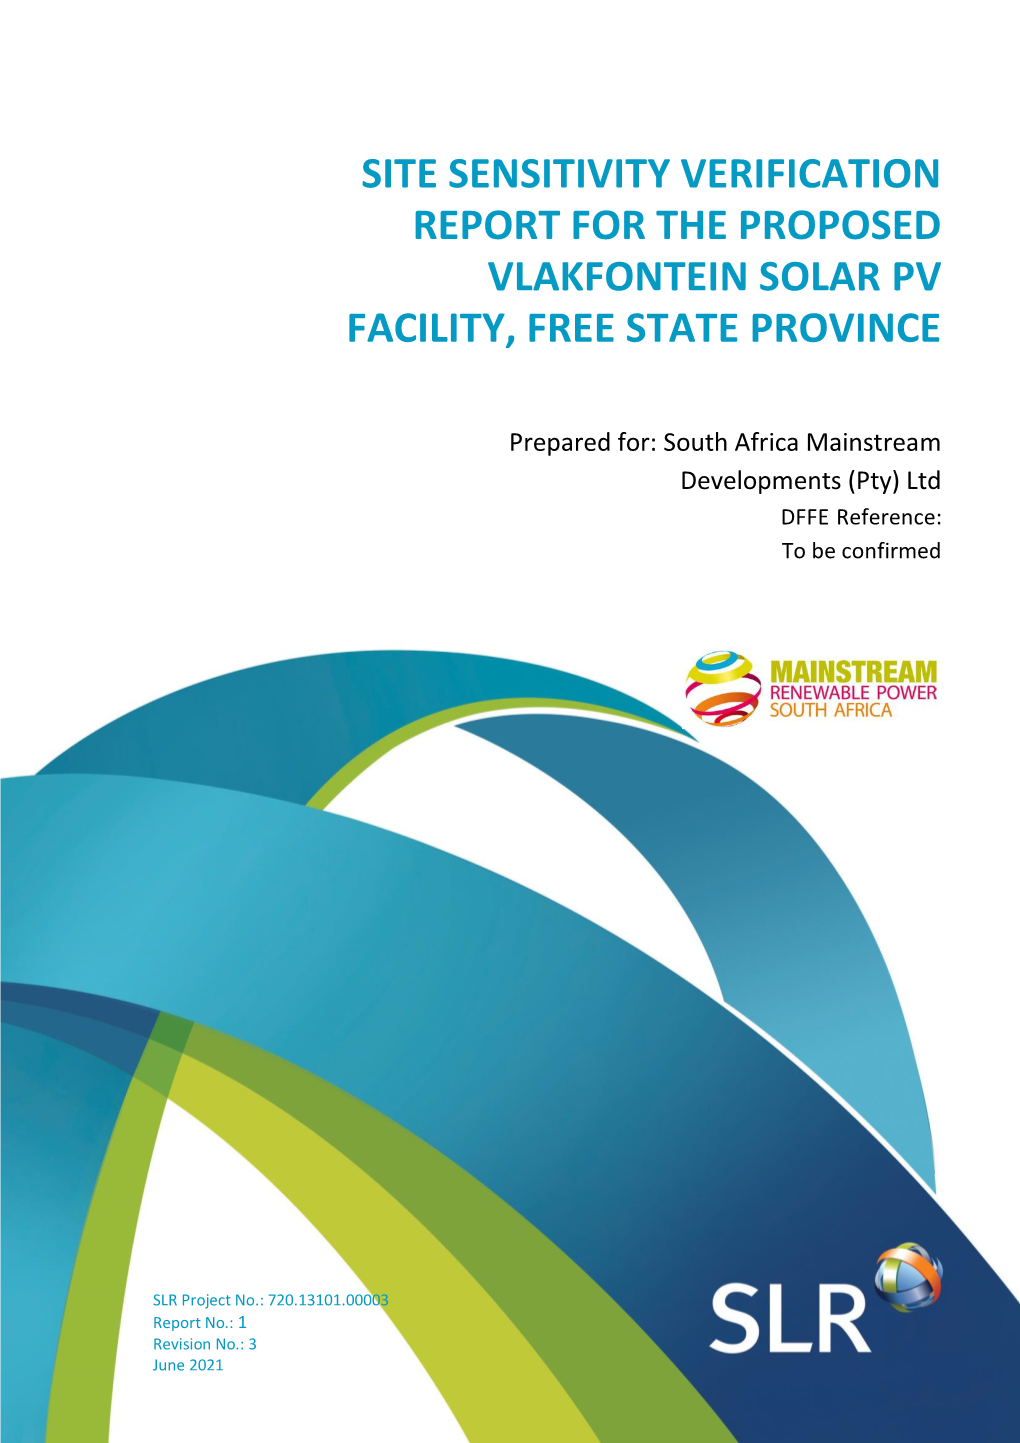 Site Sensitivity Verification Report for the Proposed Vlakfontein Solar Pv Facility, Free State Province